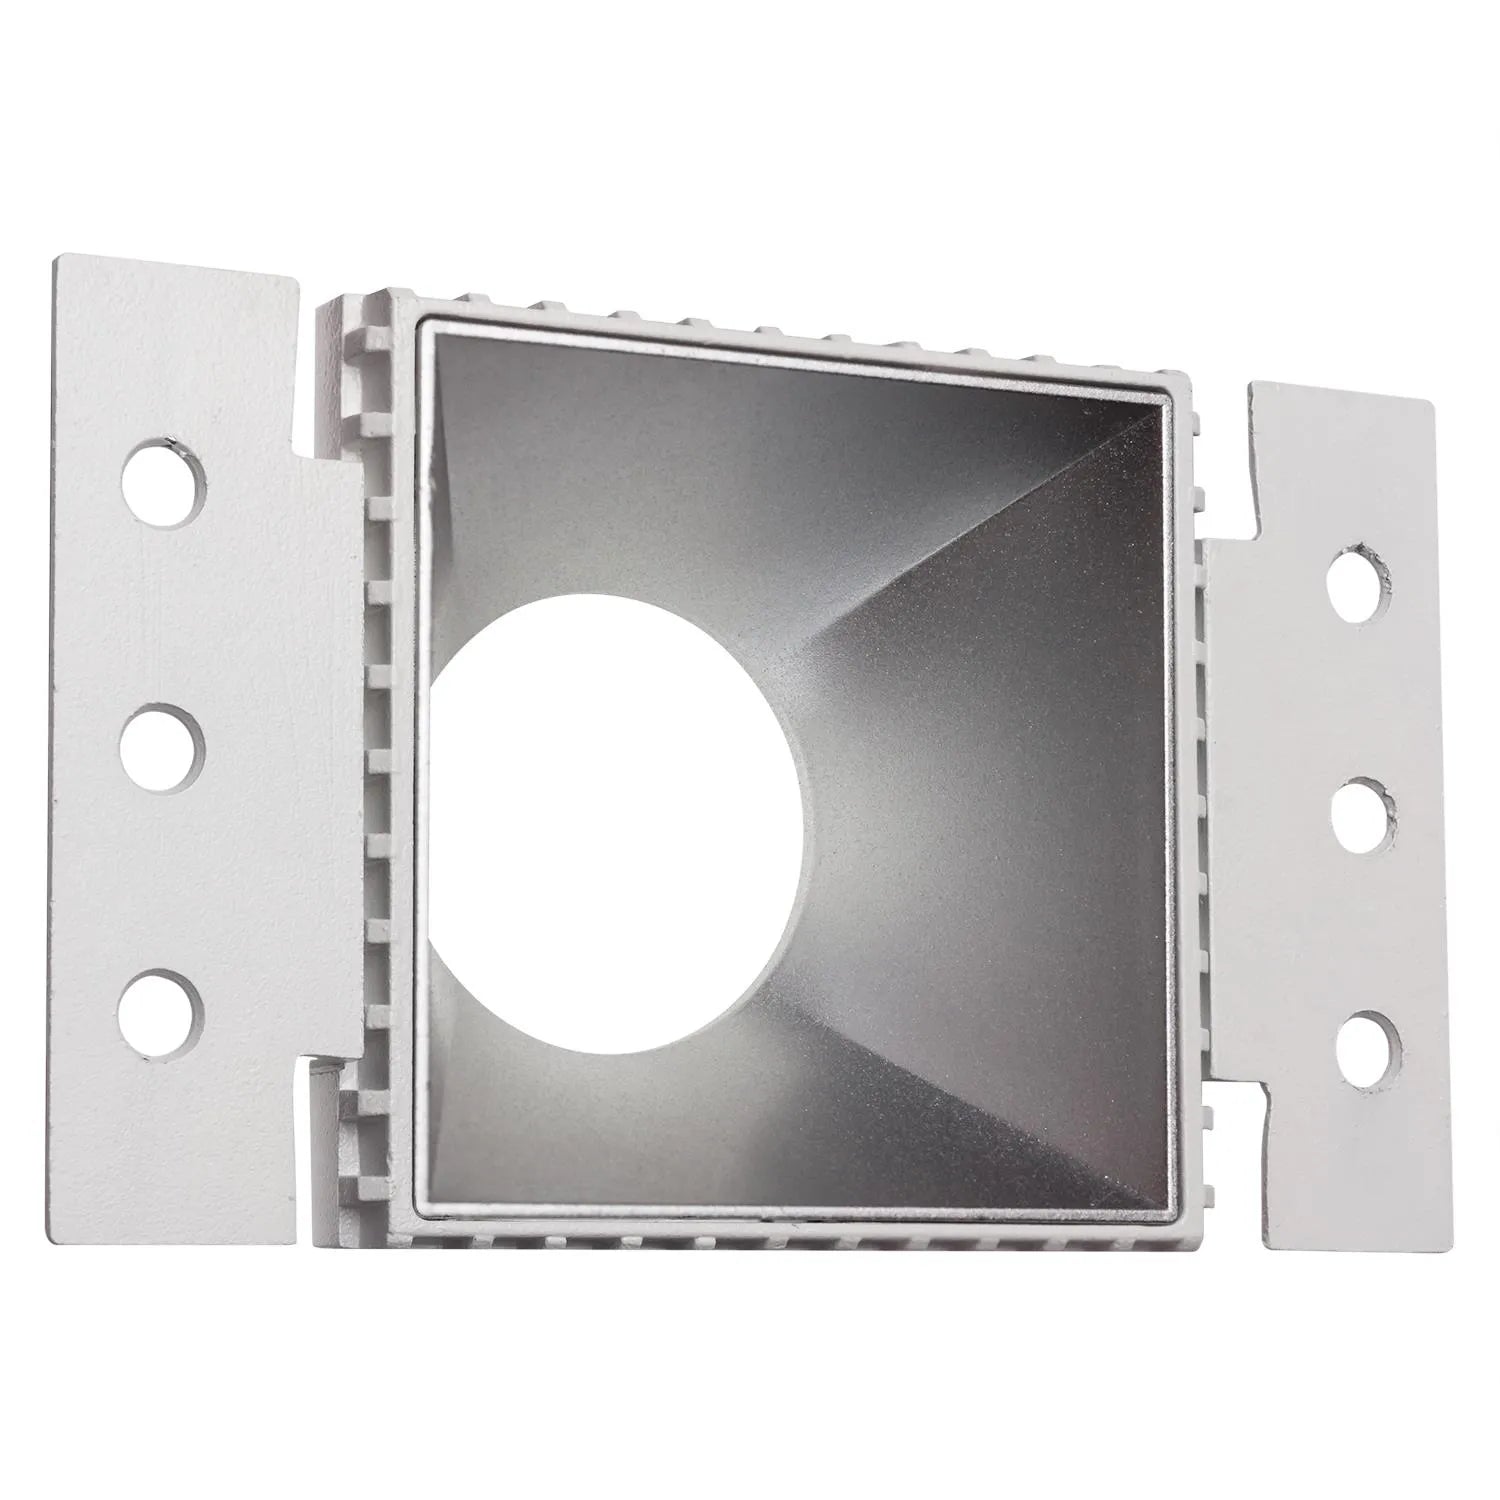 Westgate LRD-TL-10W-30K-4S-HZ LED 4" Round Architectural Trimless Recessed Light Residential Lighting - Matte Silver